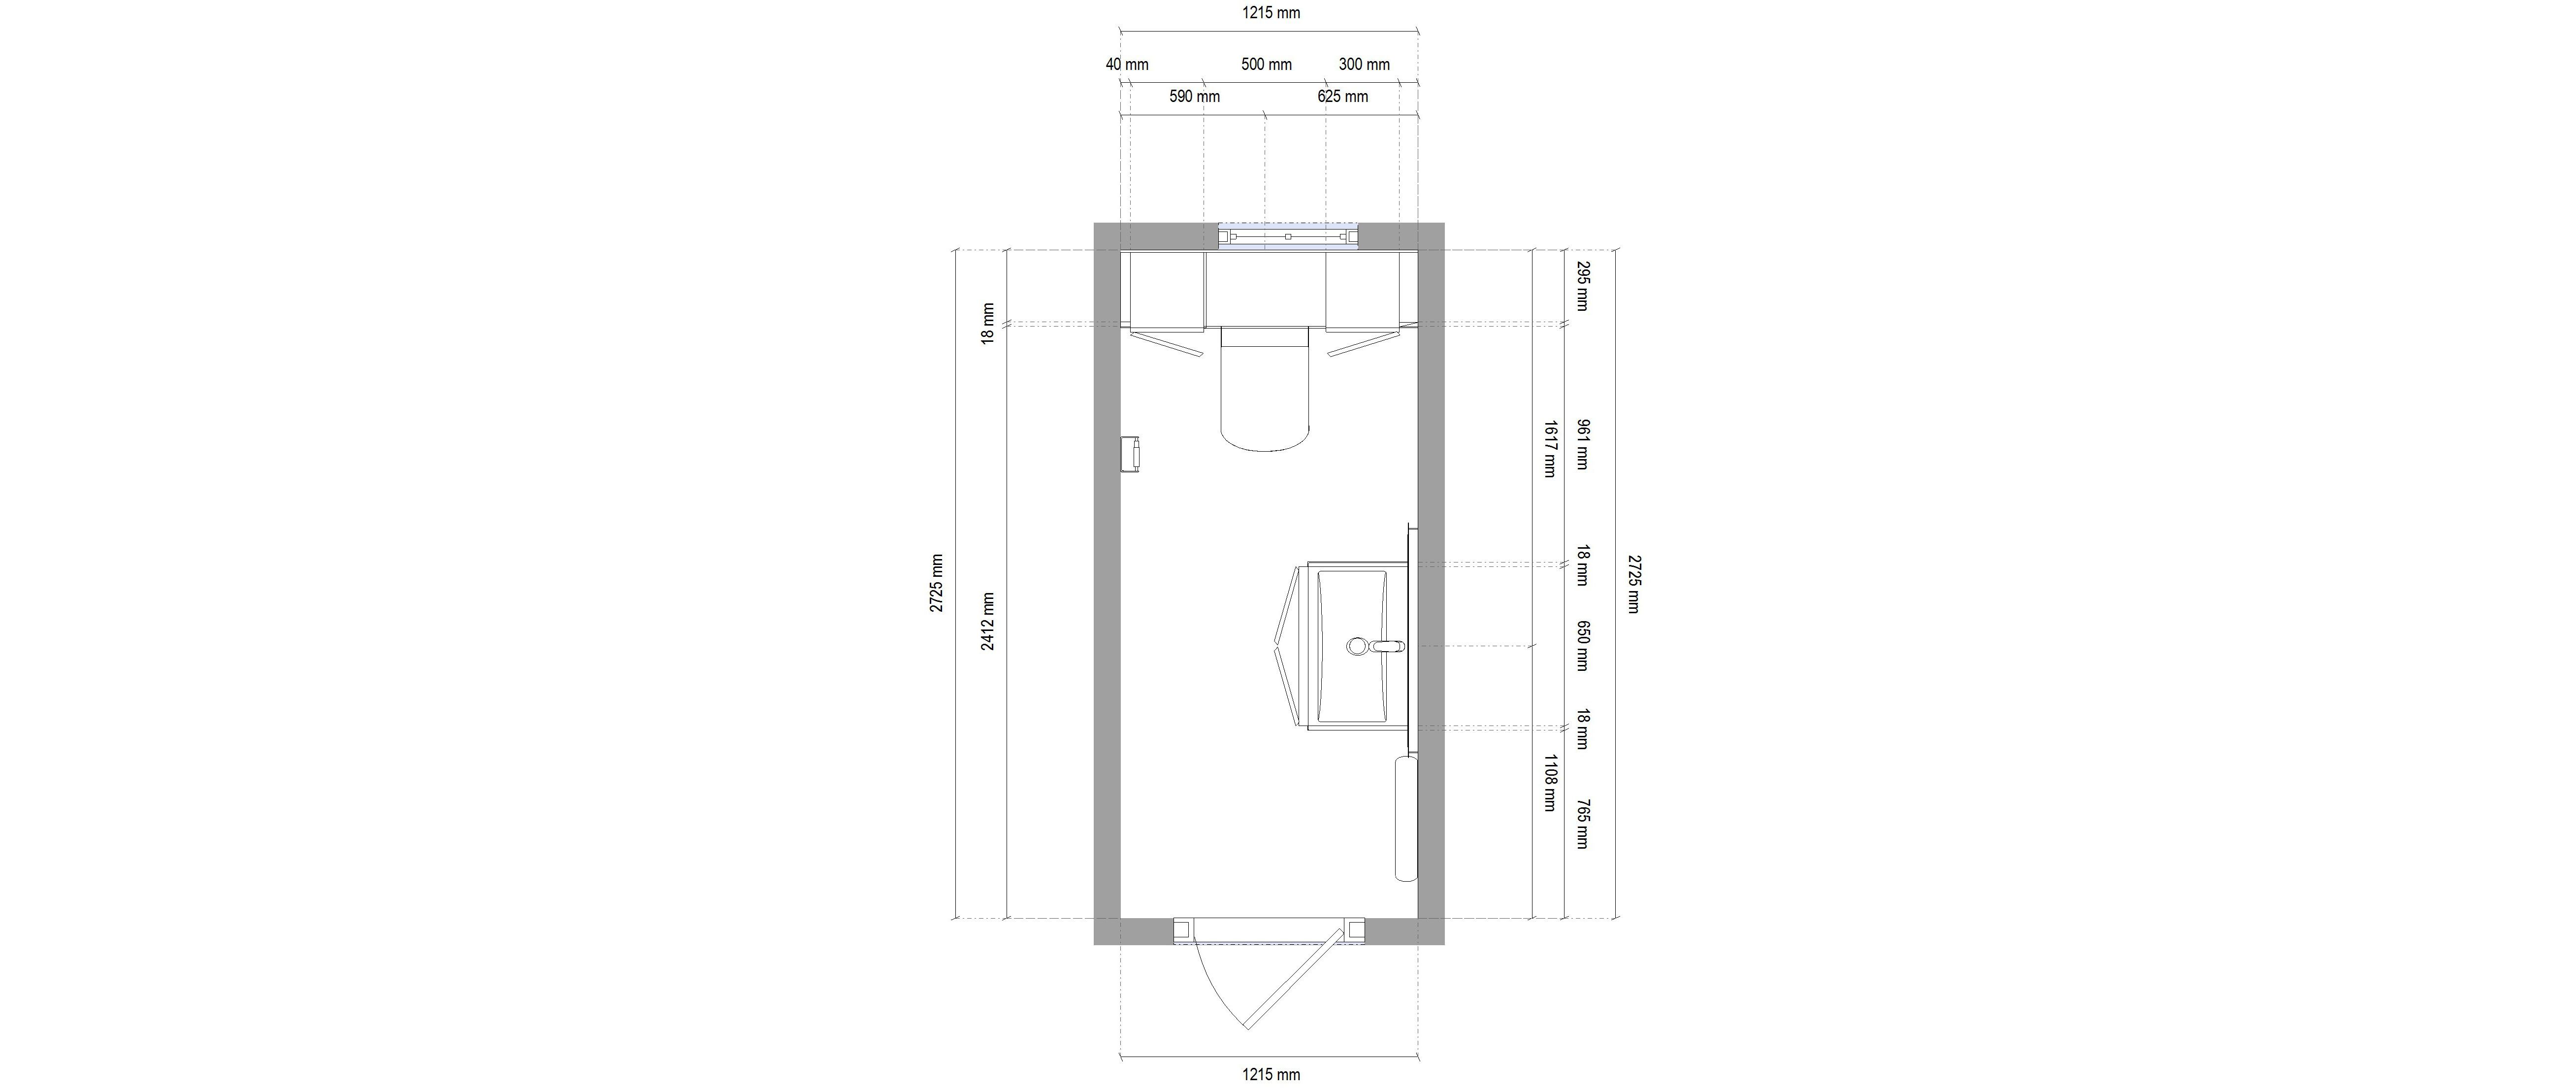 Toilet and Cloakroom 2D plan